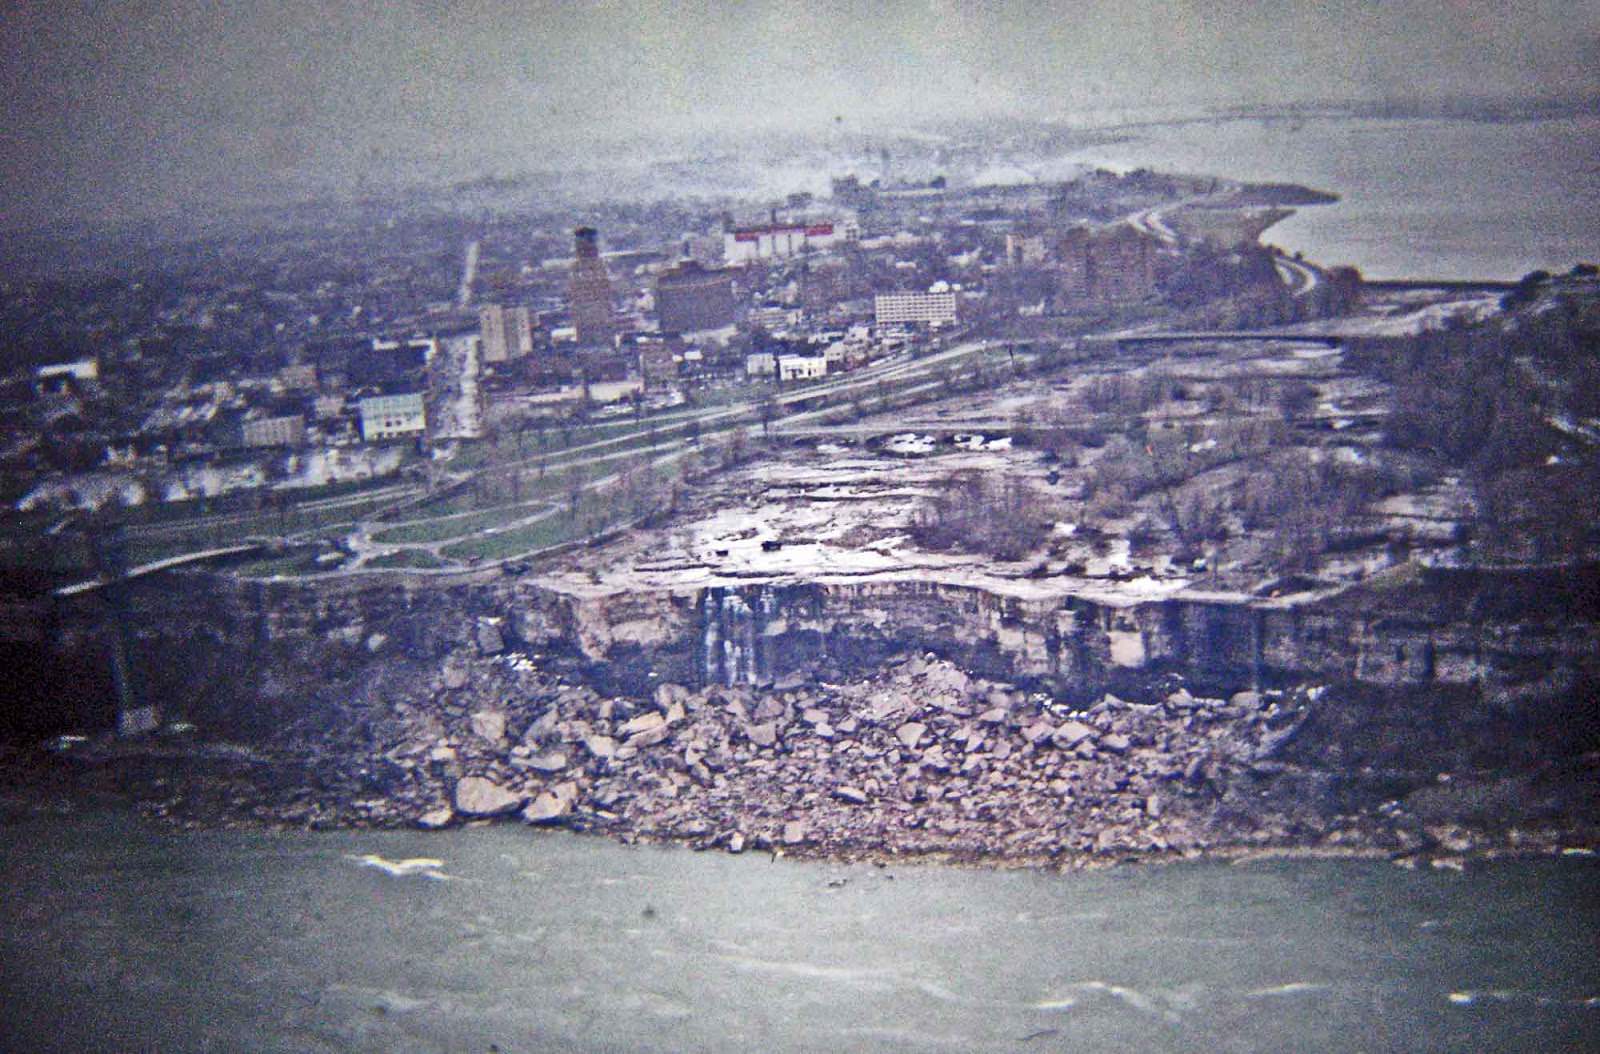 In June 1969, U.S. engineers diverted the flow of the Niagara River away from the American side of the falls for several months.